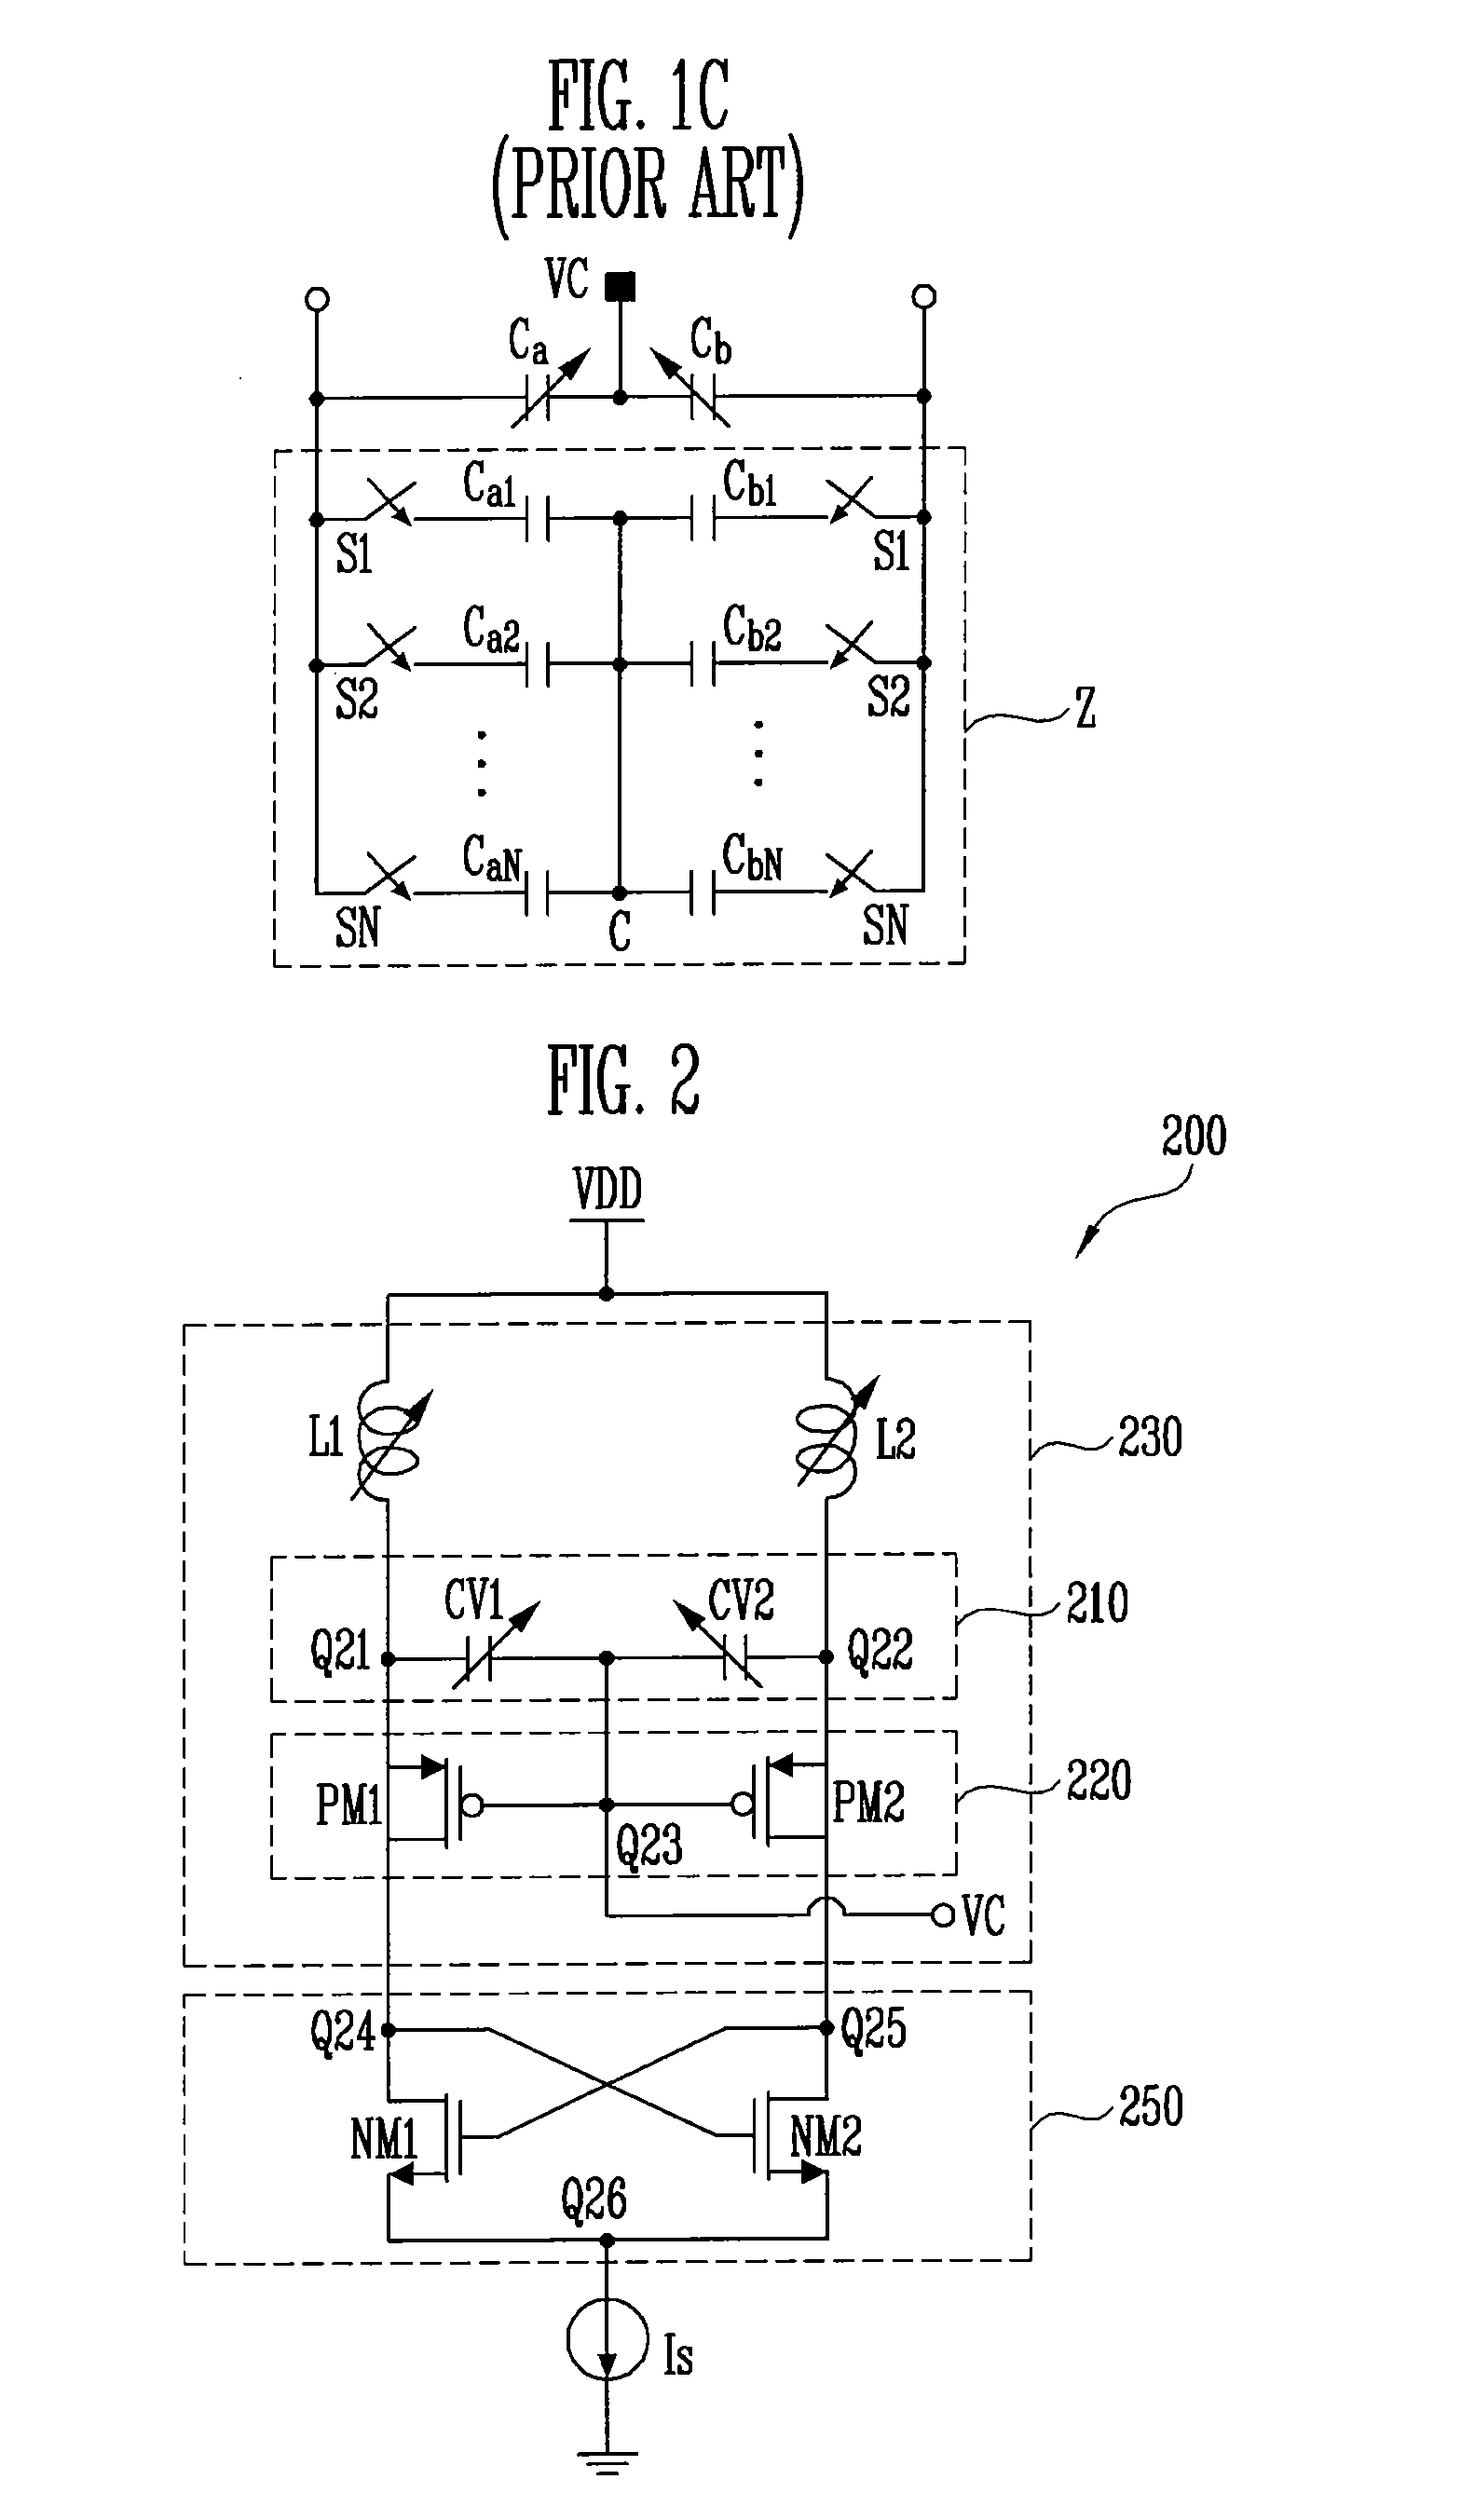 Voltage-controlled oscillator with wide oscillation frequency range and linear characteristics